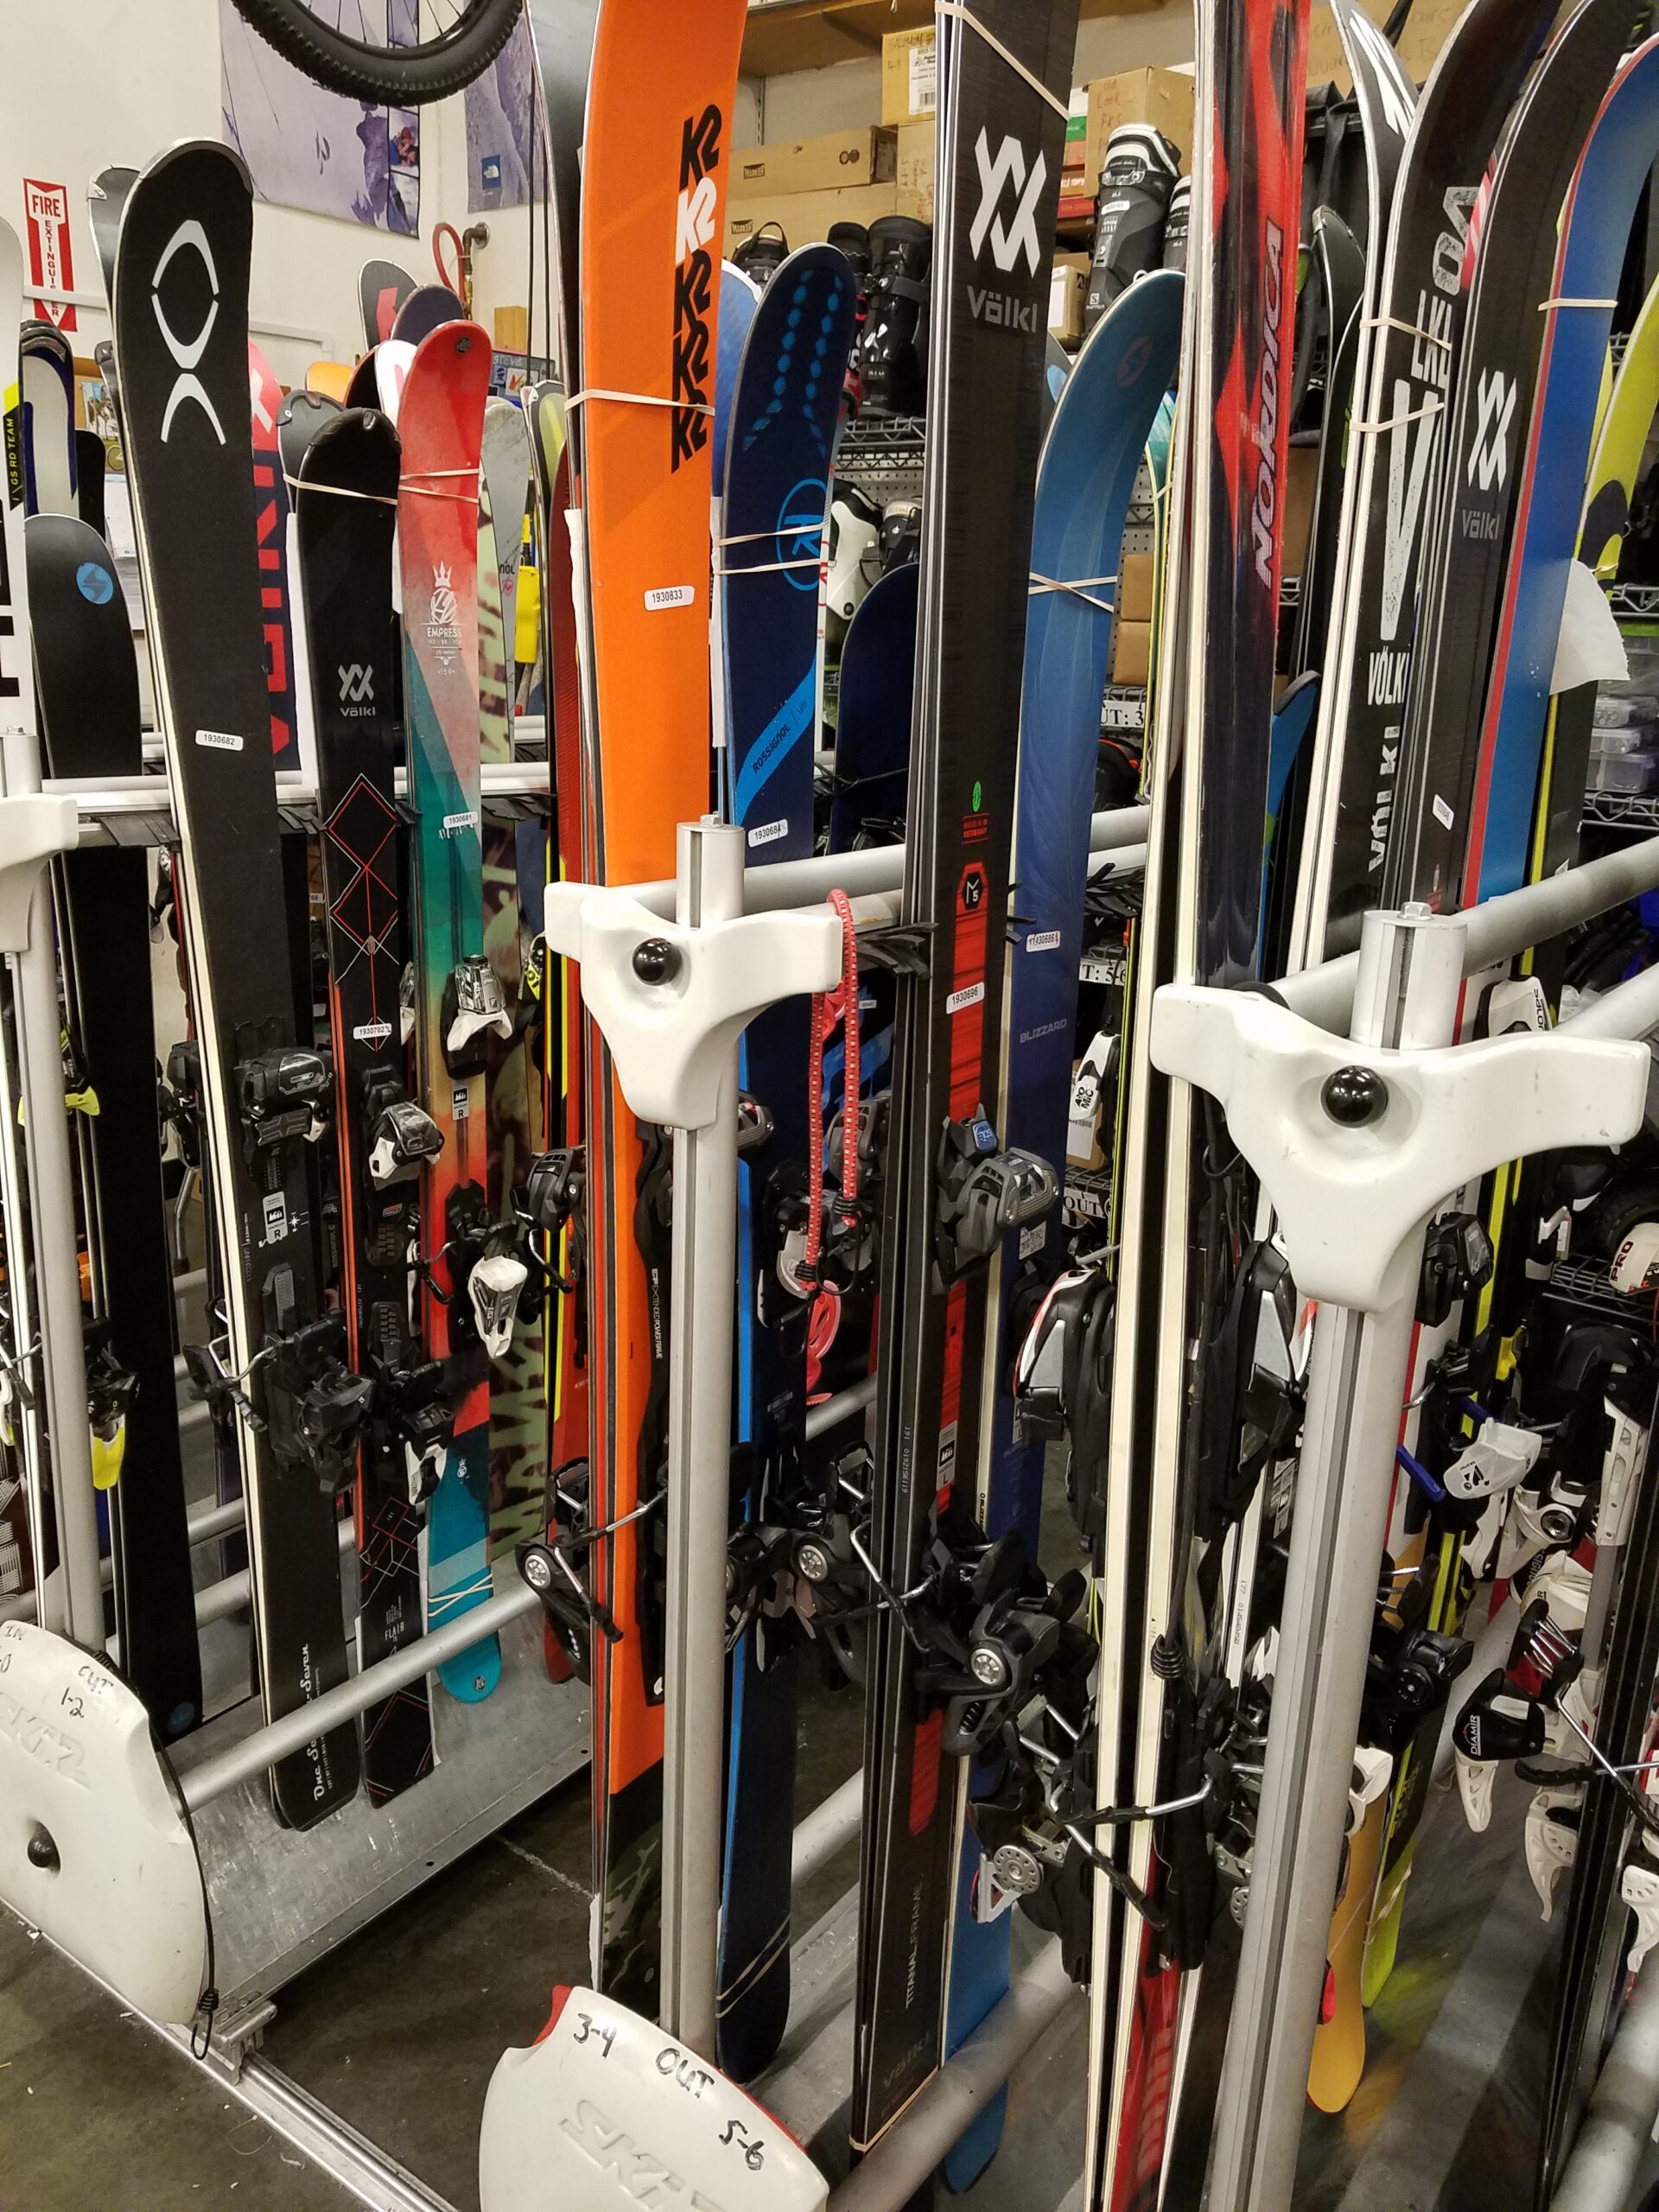 Skis and snowboards in racks waiting to be waxed